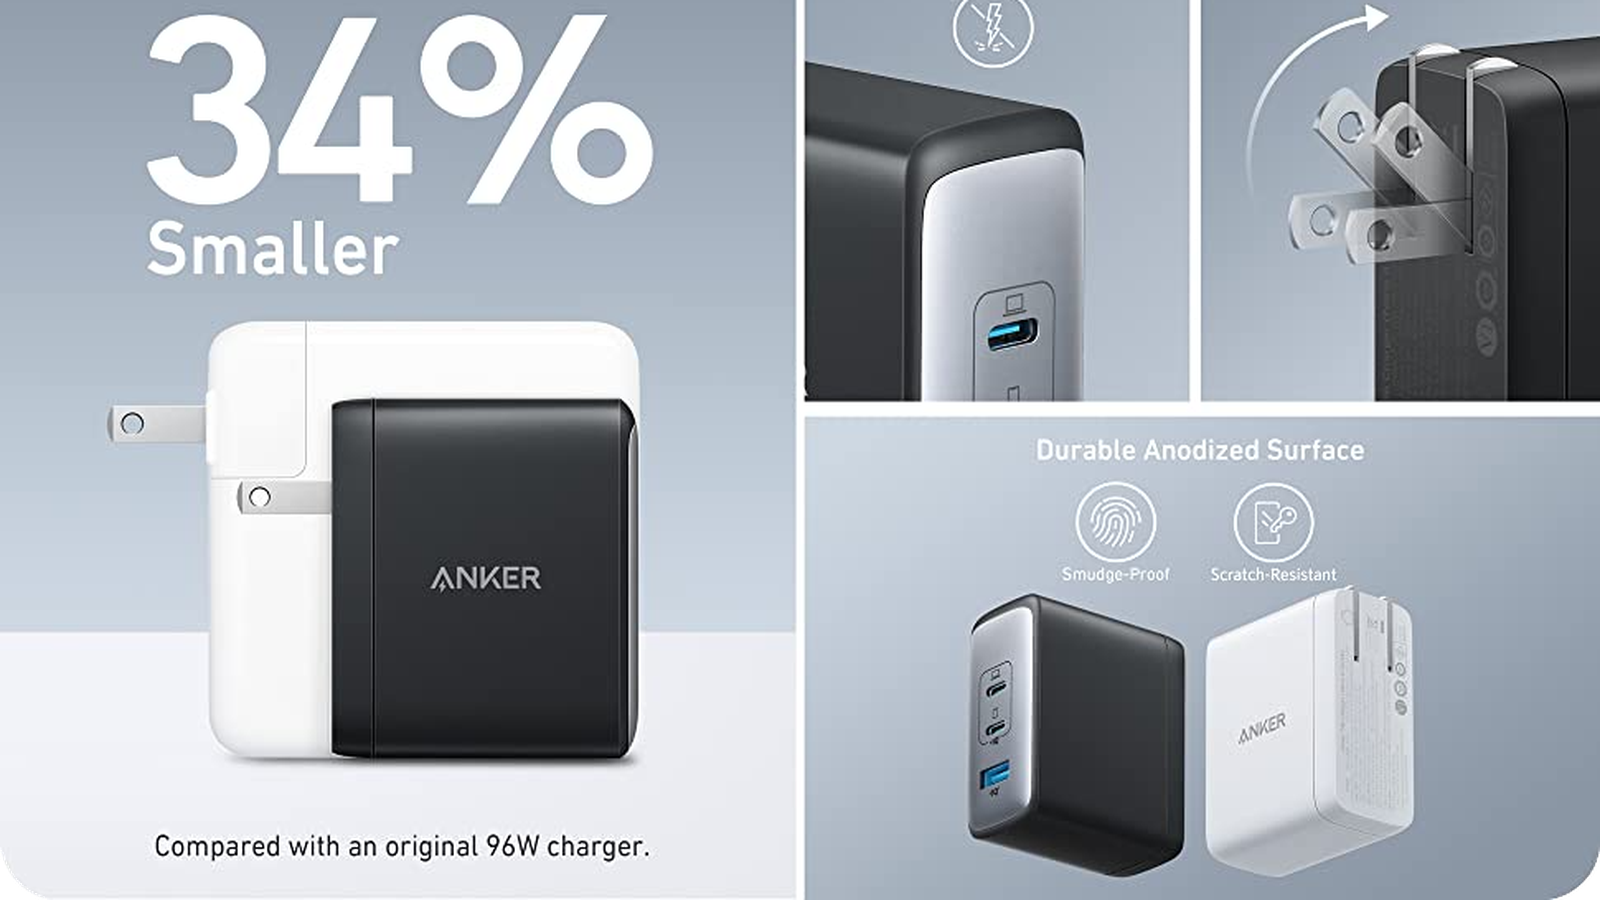 mooi volume tank Anker's New 100W GaN Charger Features Three USB Ports, 34% Smaller Size  Than Apple's 96W Charger - MacRumors